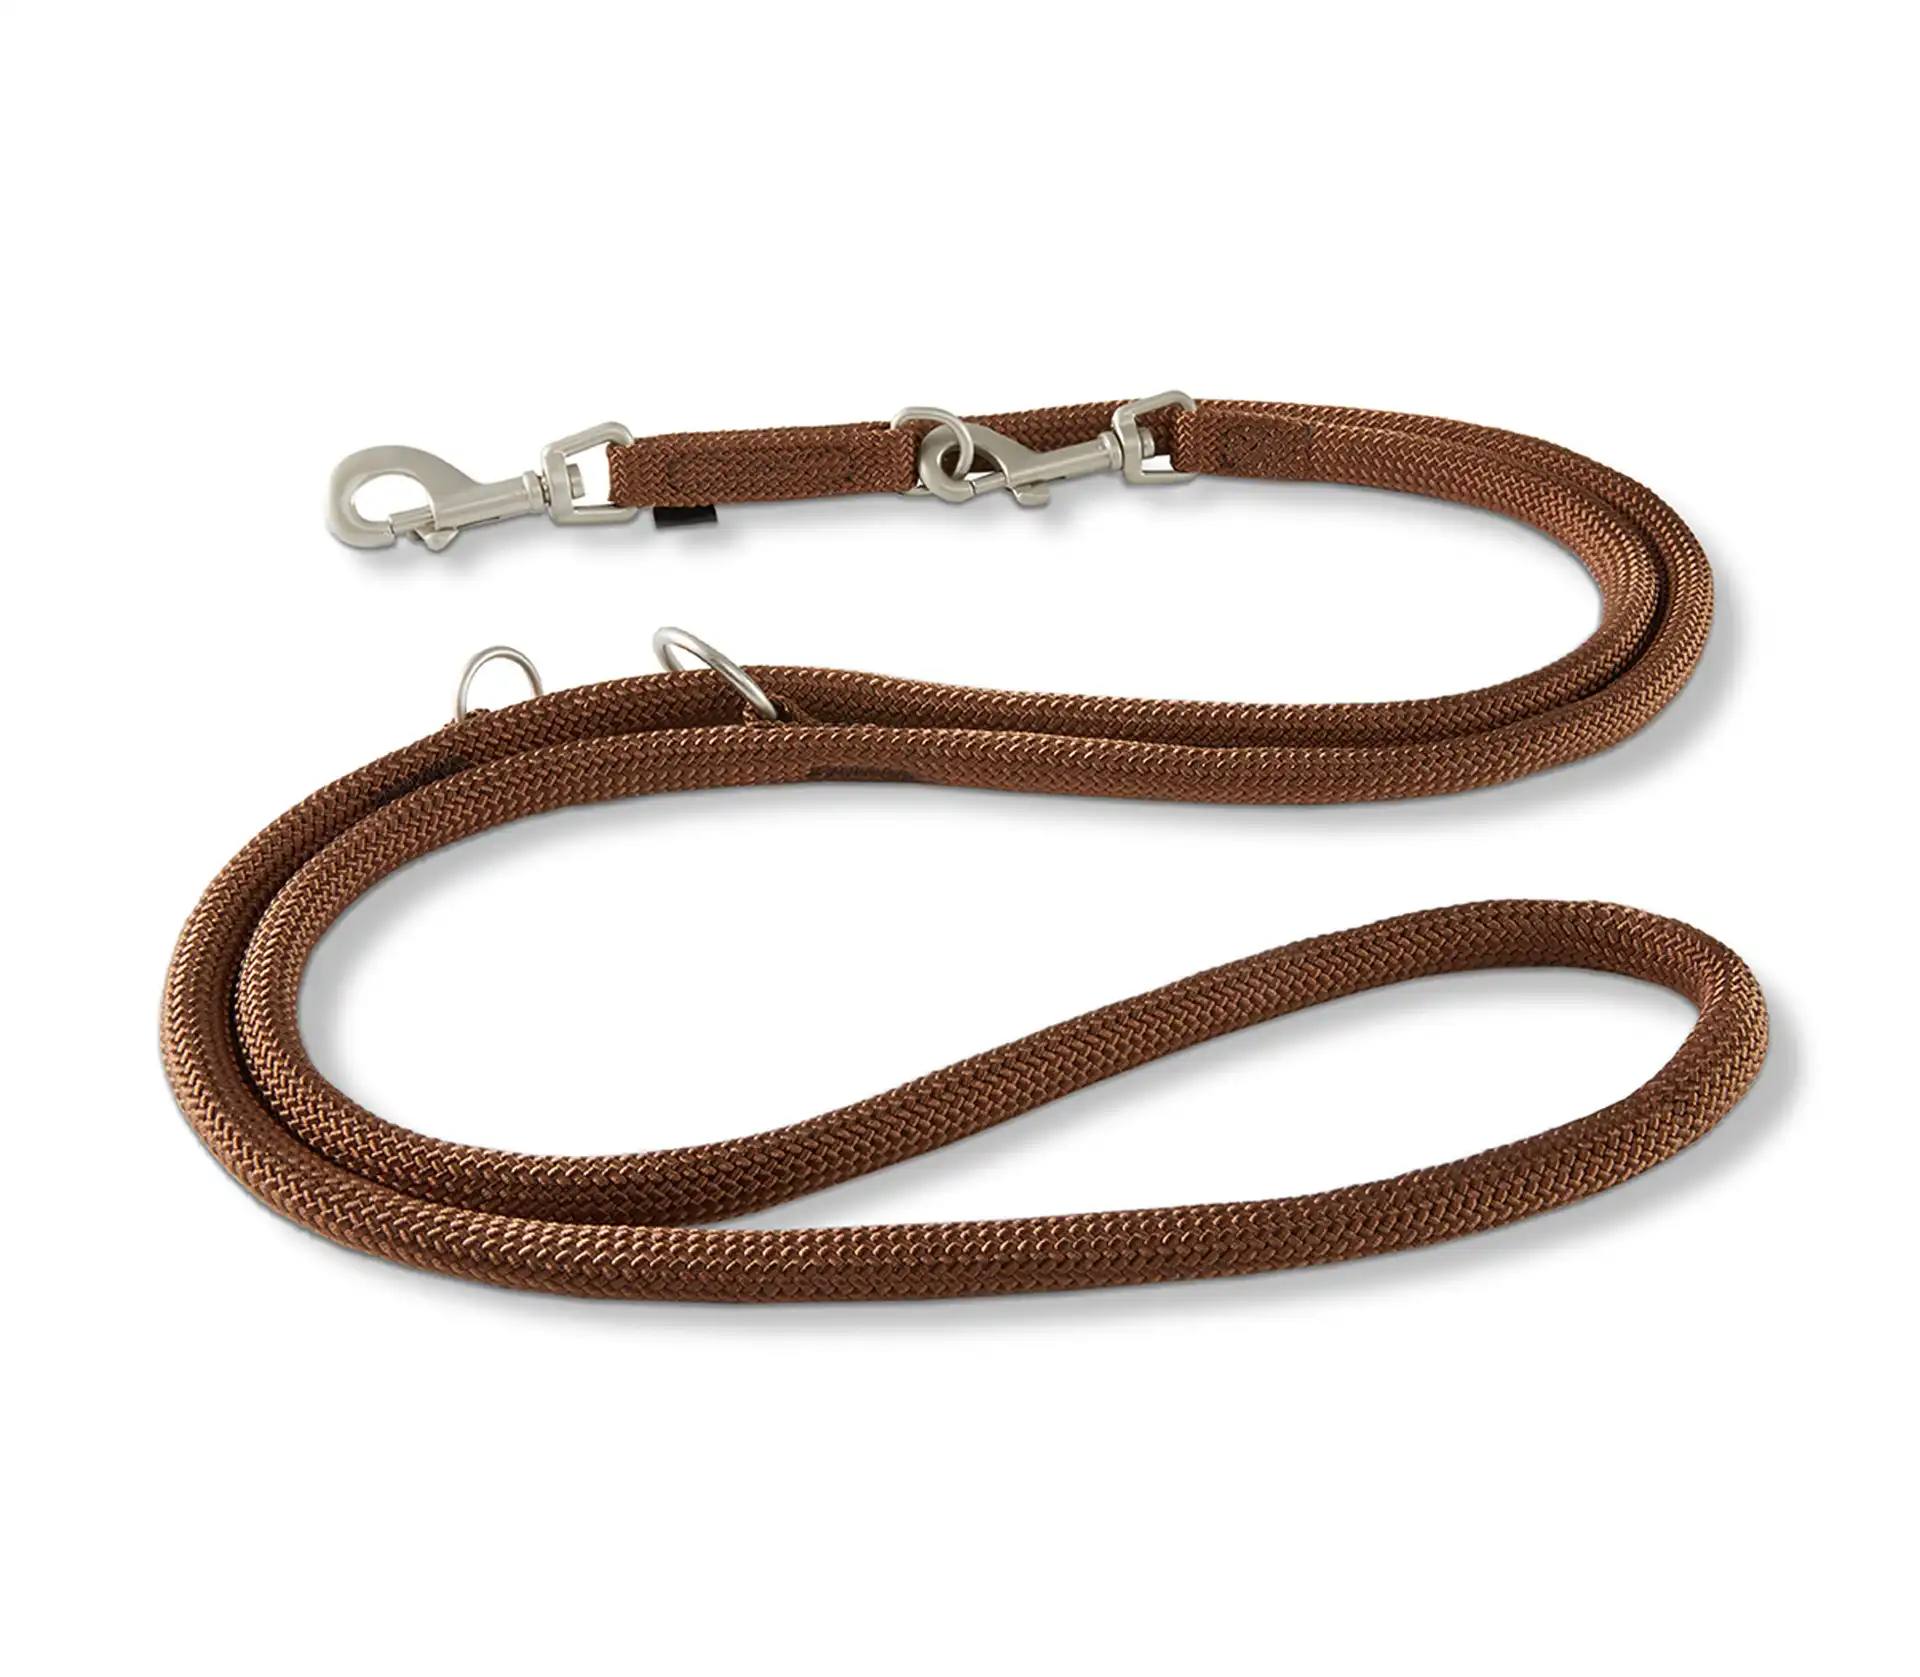 K2 Rope Programme Guide Leash